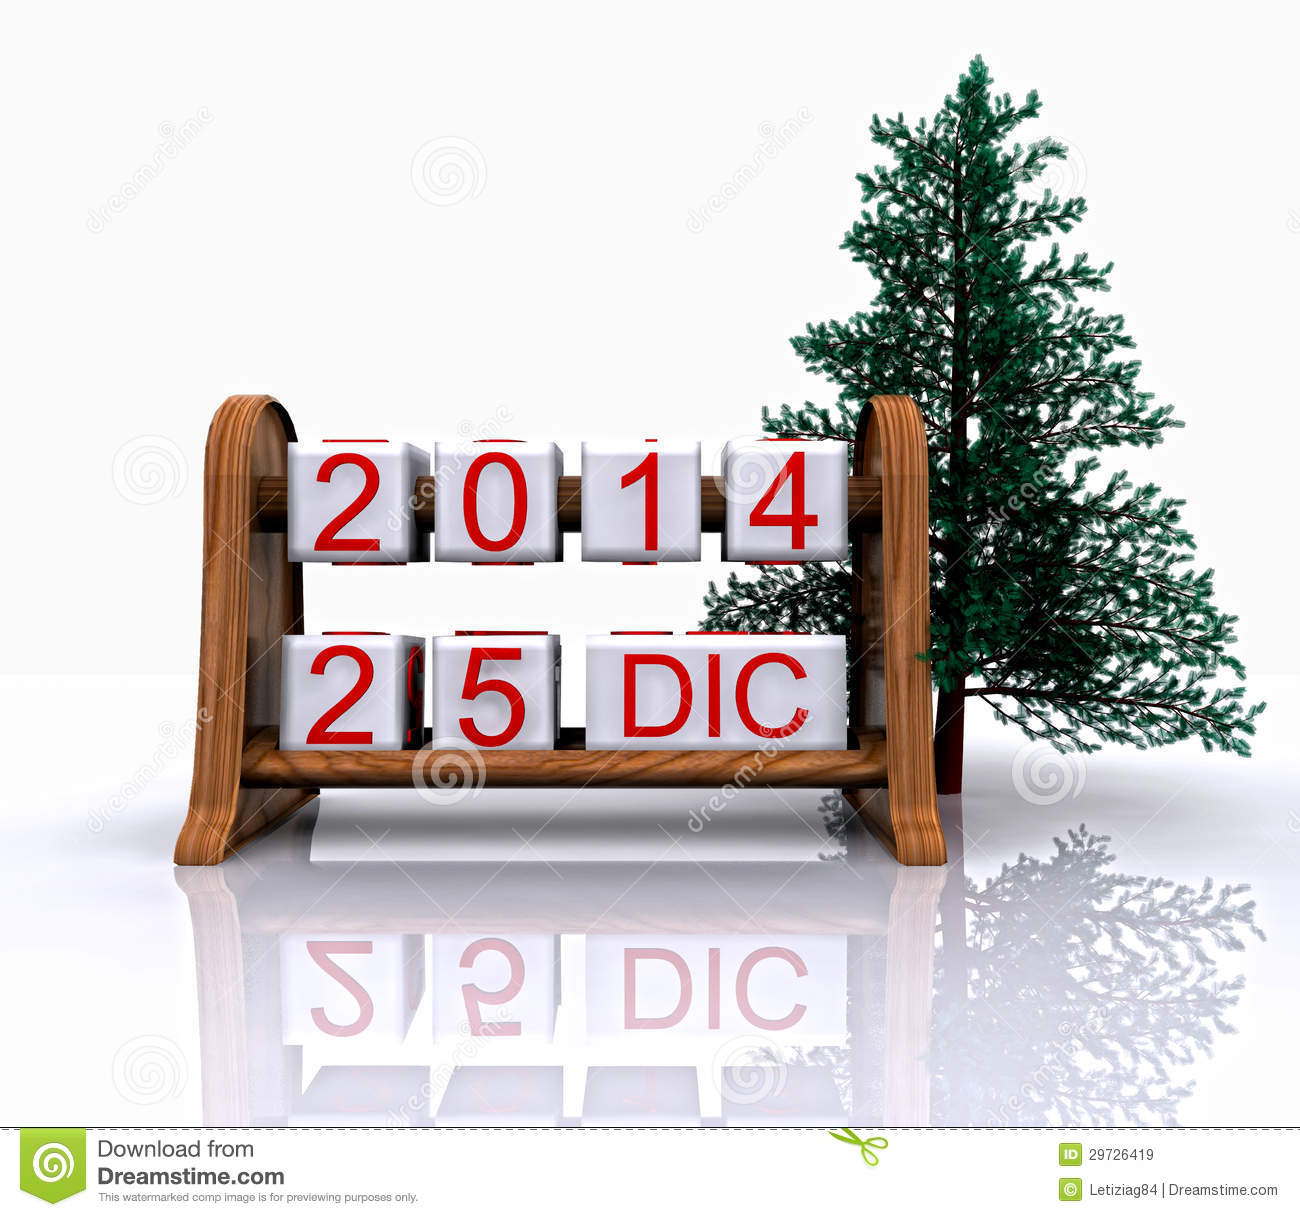 December 25 2014 Royalty Free Stock Images   Image  29726419